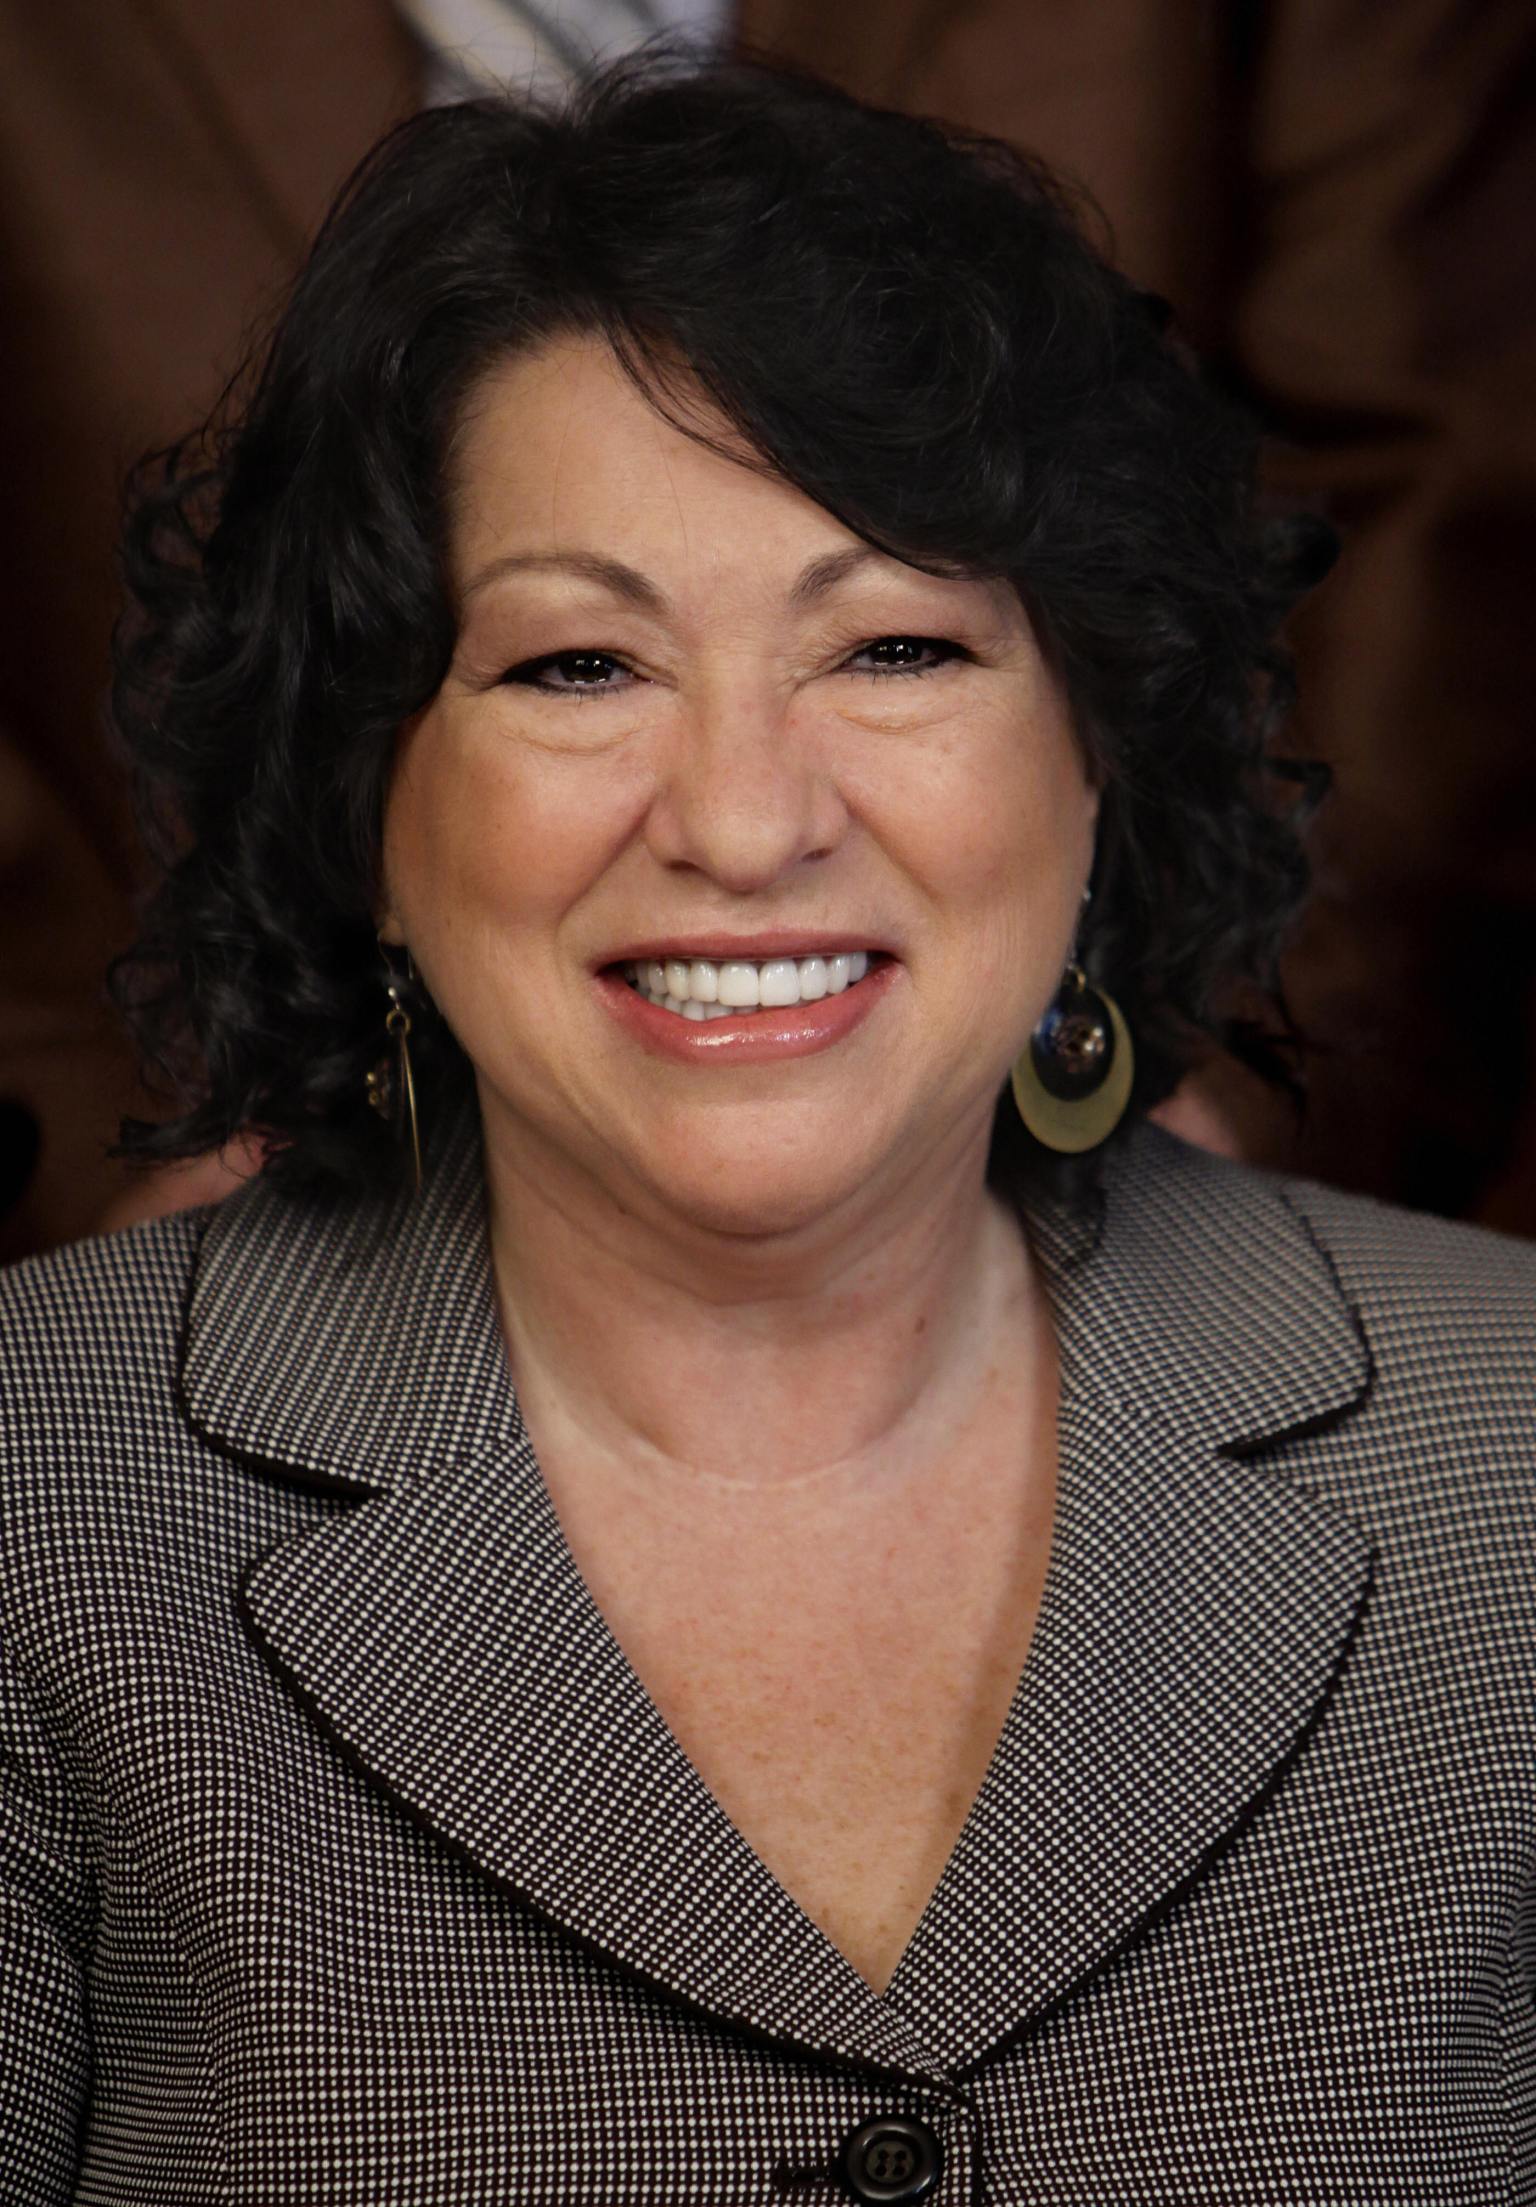 Sonia Sotomayor Quotes: The Justice's Most Memorable Words | HuffPost